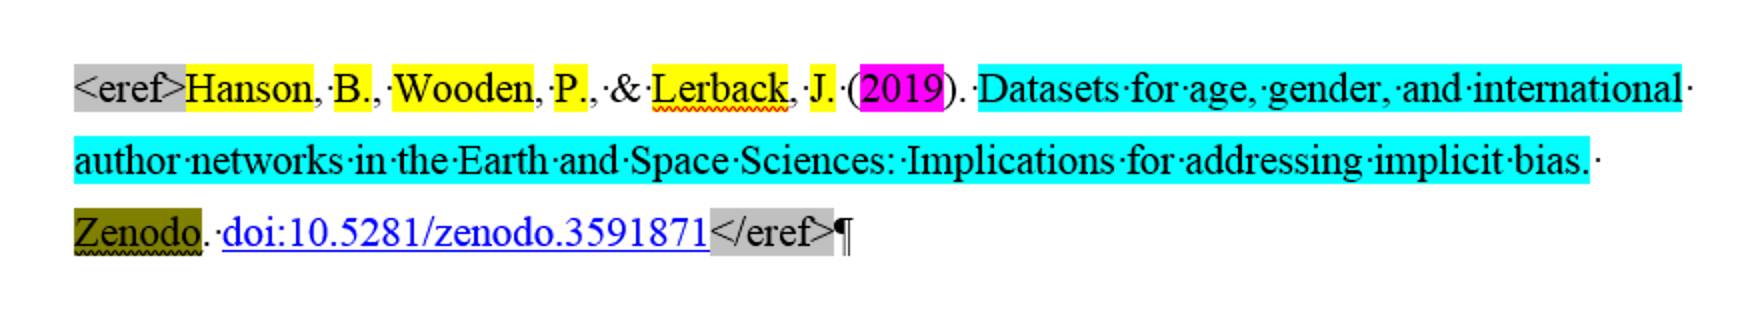 Screenshot of a reference entry processed by eXtyles: <eref>Hanson, B., Wooden, P., & Lerback, J. (2019). Datasets for age, gender, and international author networks in the Earth and Space Sciences: Implications for addressing implicit bias. Zenodo. doi:10.5281/zenodo.3591871</eref>